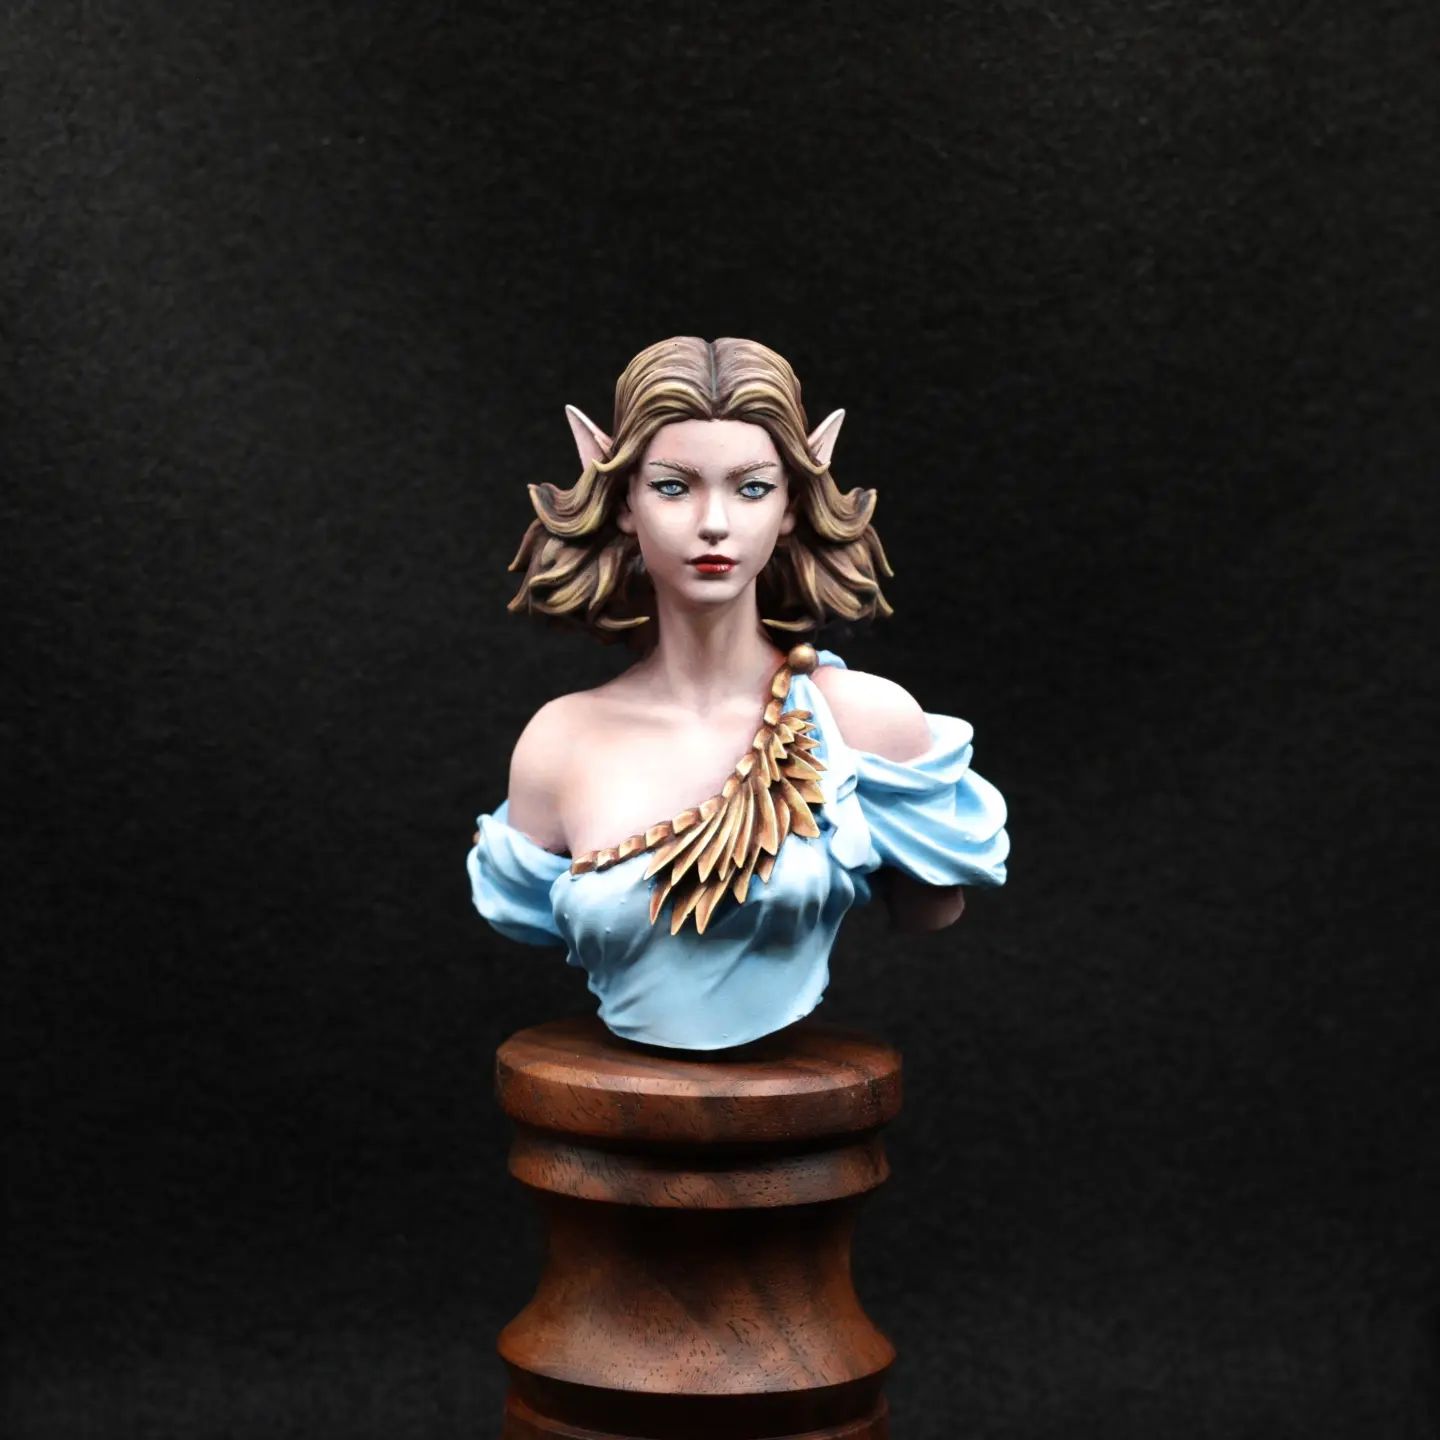 Cesedra bust, had all sorts of issues while painting this.... Paruvian walnut plinth #cesedra #bust #mini #miniatures #miniaturepainting #miniature #paruvianwalnut #walnut #rpg #roleplayinggame